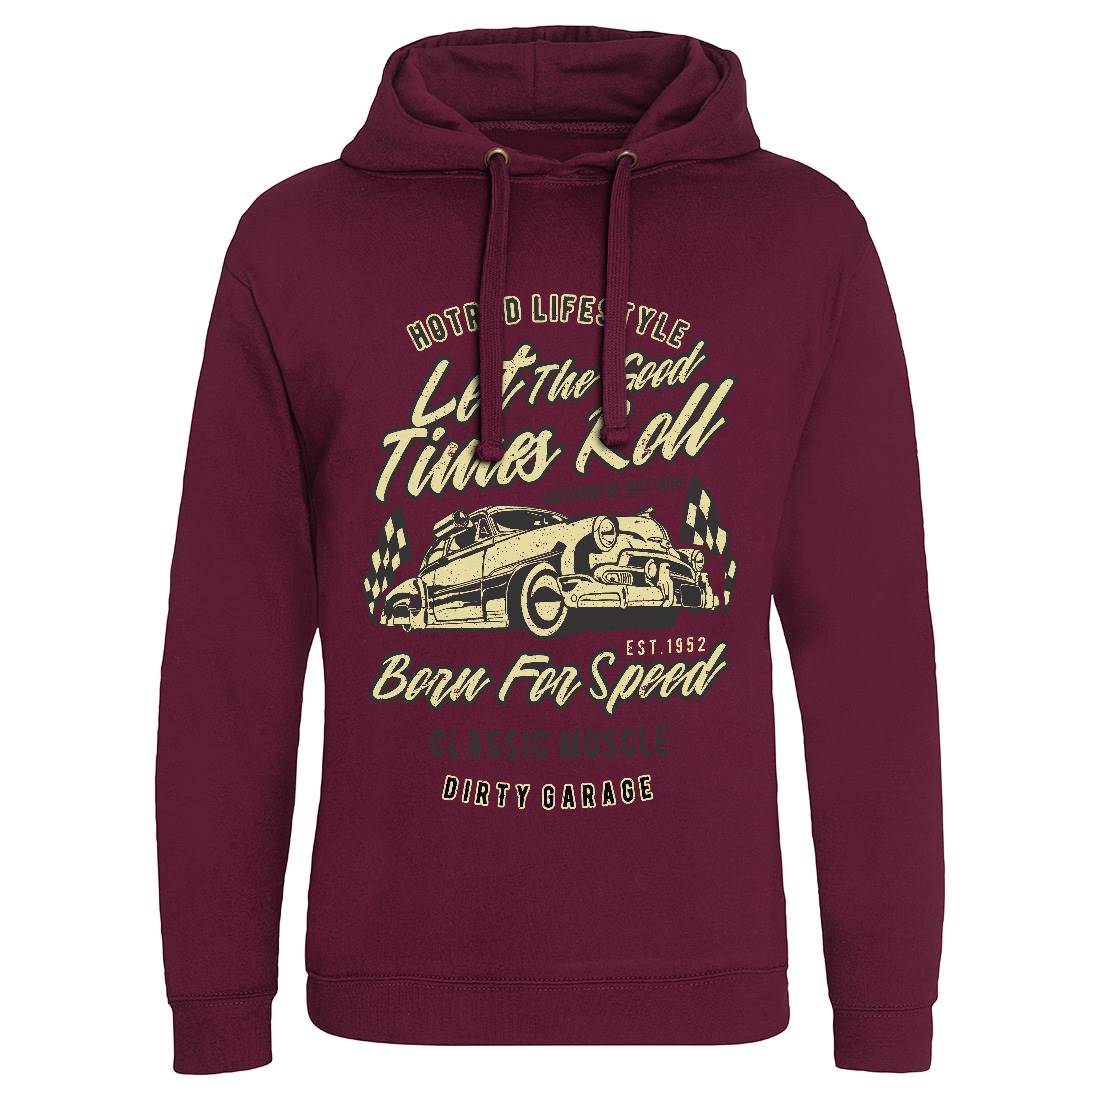 Let The Good Times Roll Mens Hoodie Without Pocket Cars A705